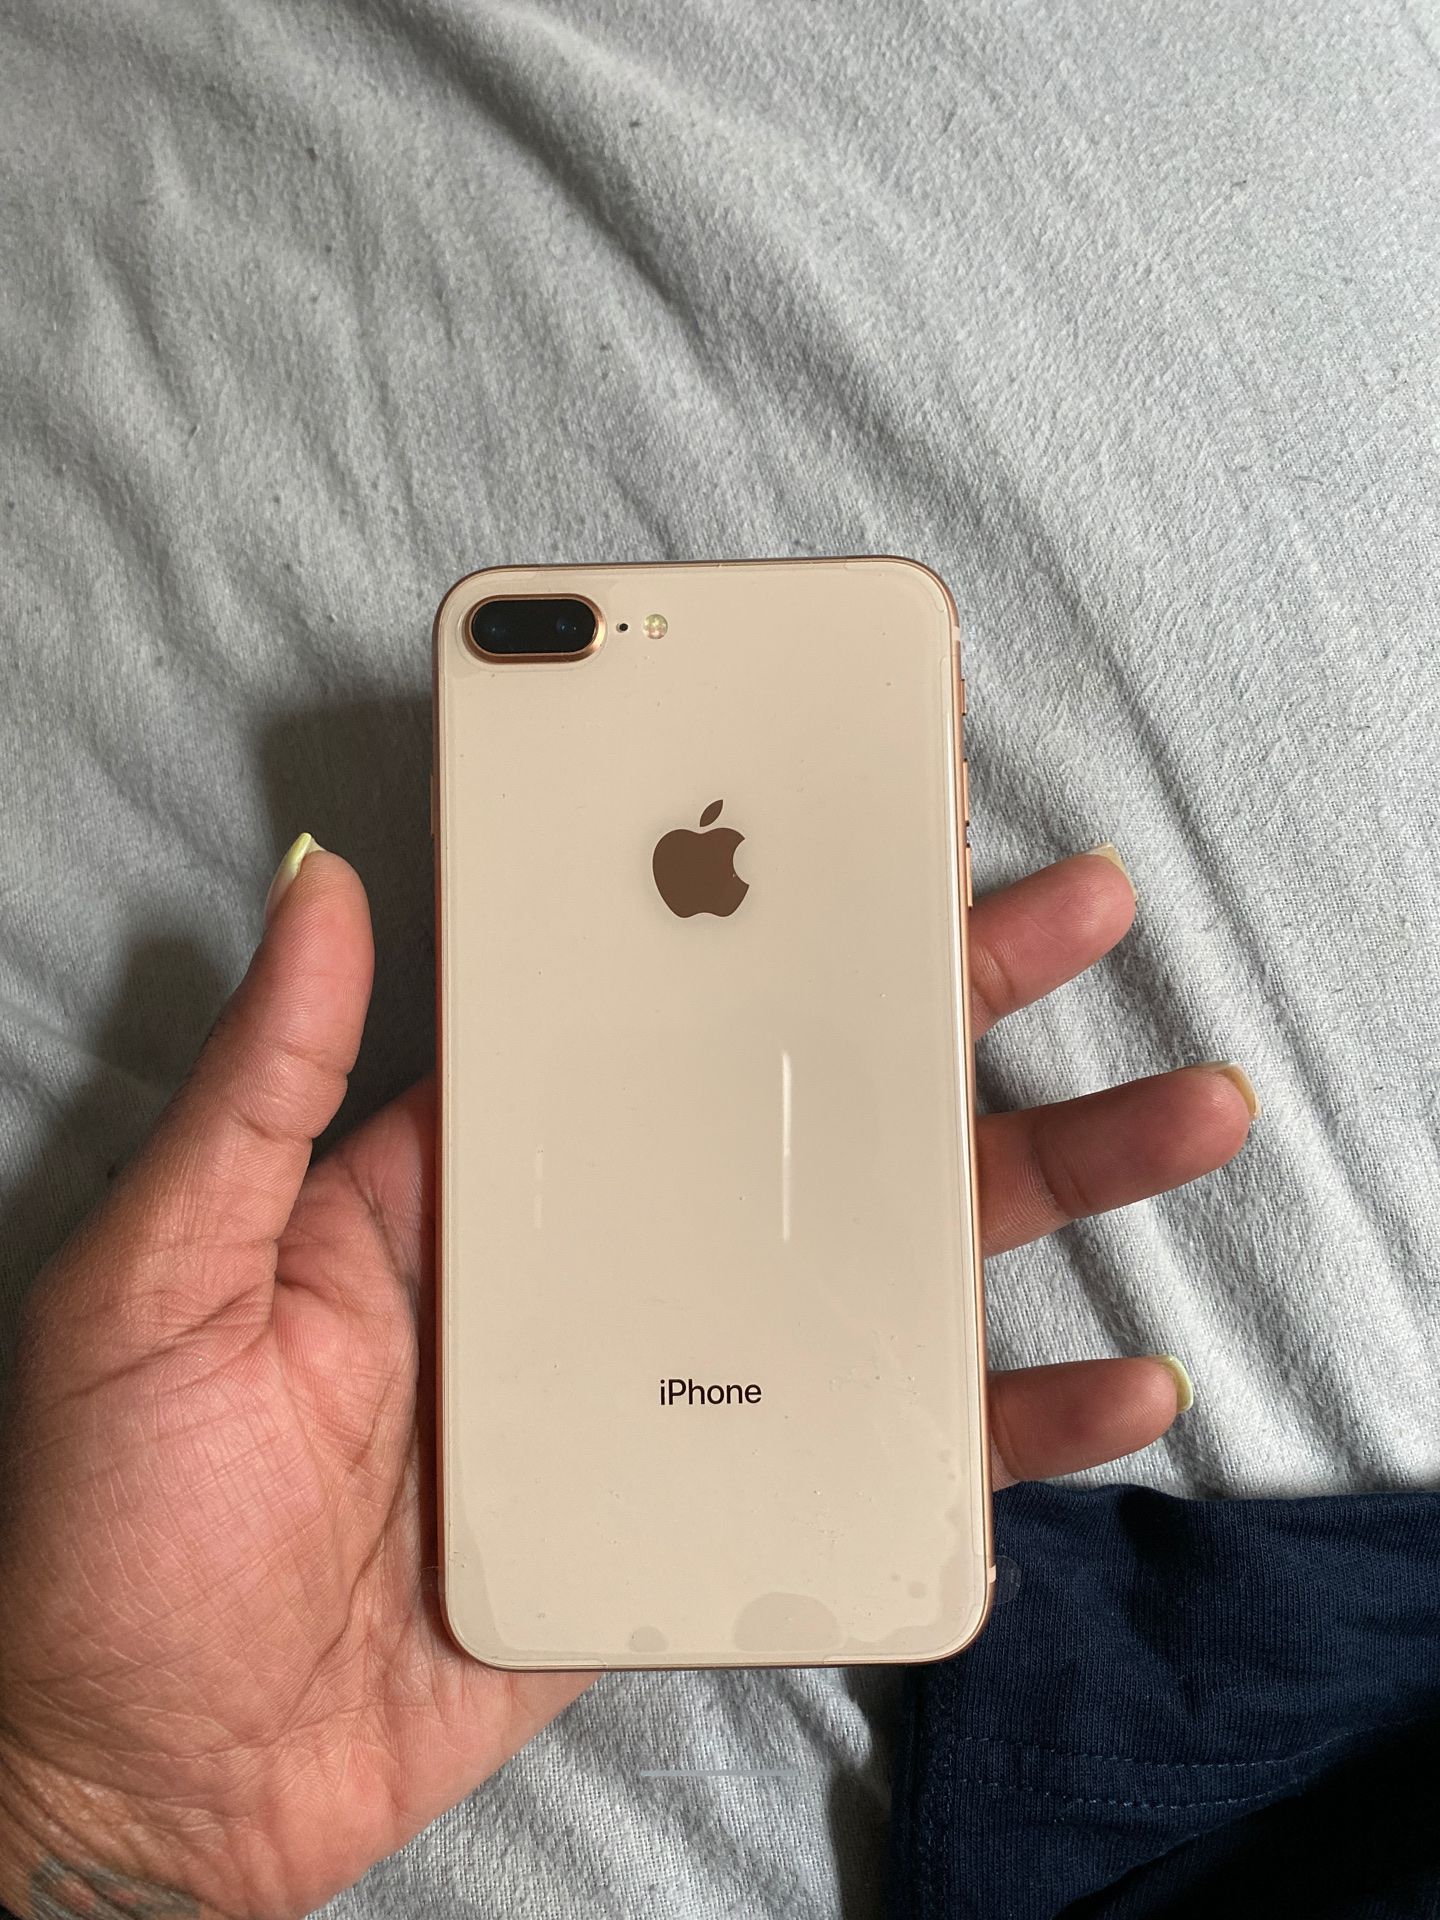 New new in box iPhone 8